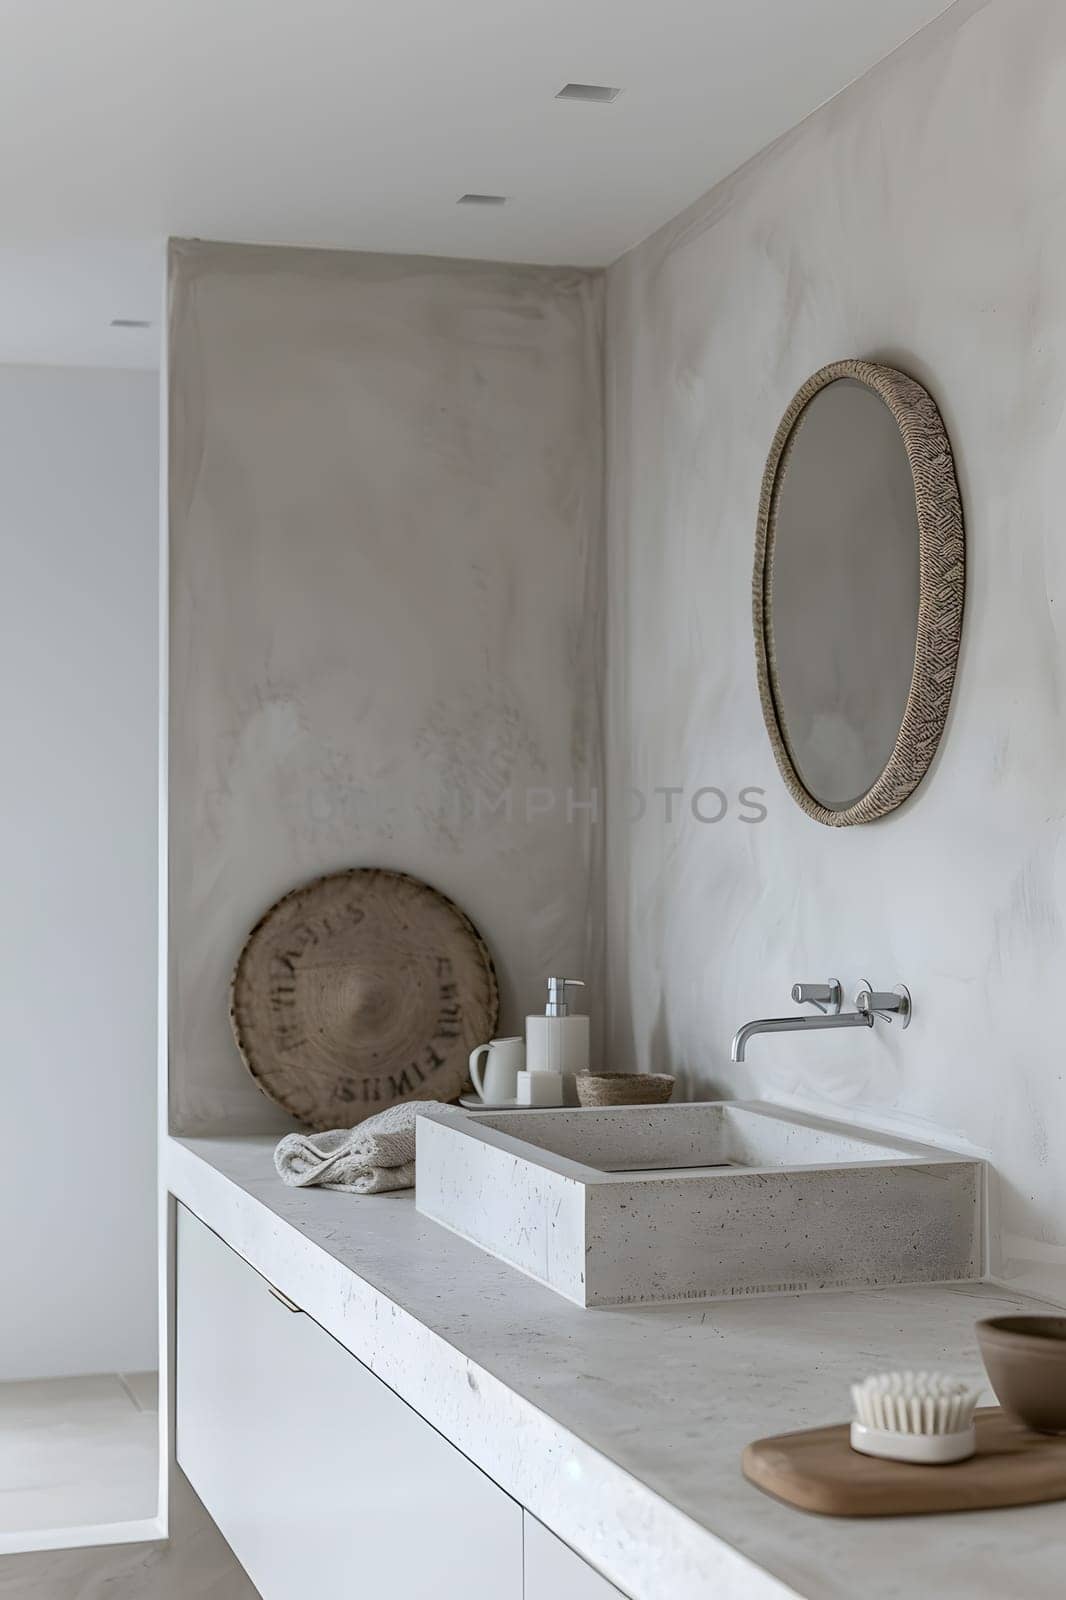 A bathroom in a house with a sink and mirror fixture on a wooden wall by Nadtochiy